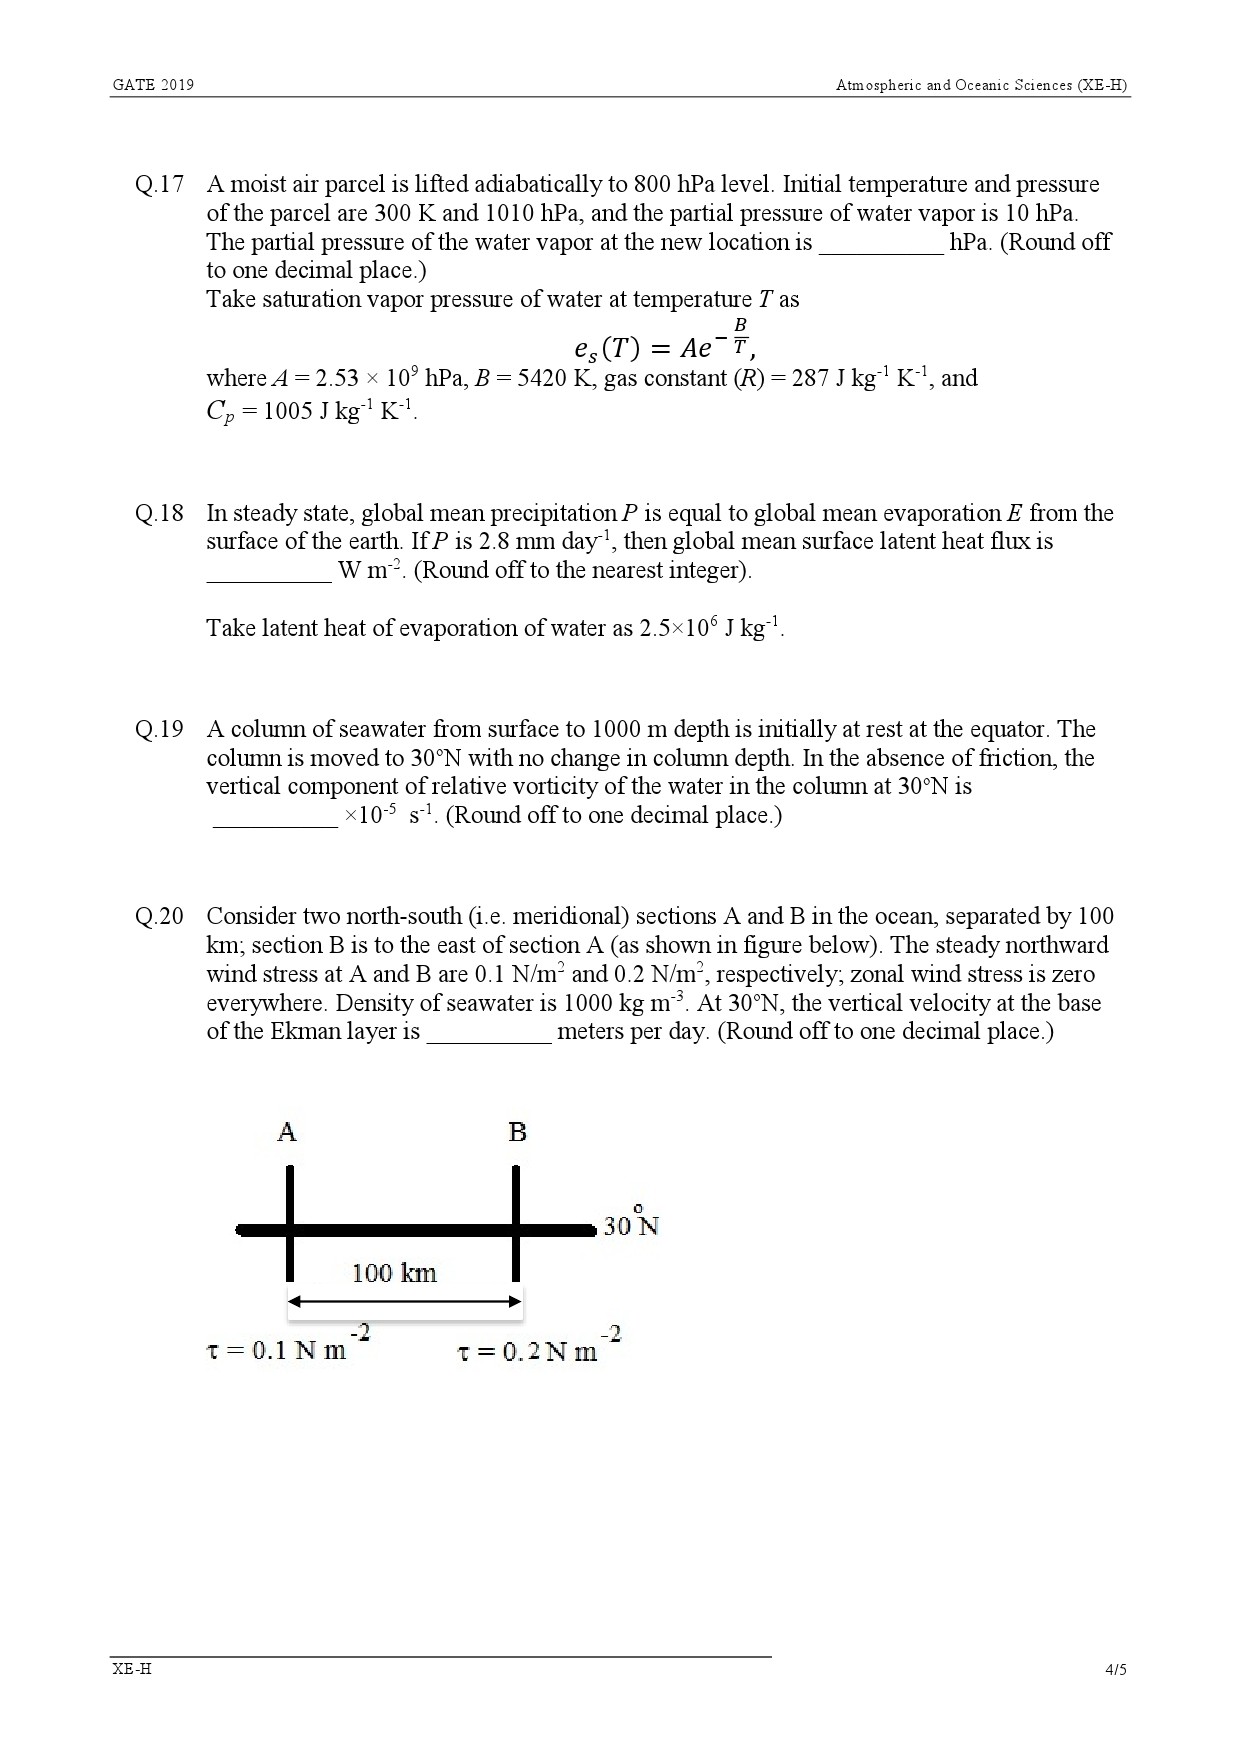 GATE Exam Question Paper 2019 Engineering Sciences 39